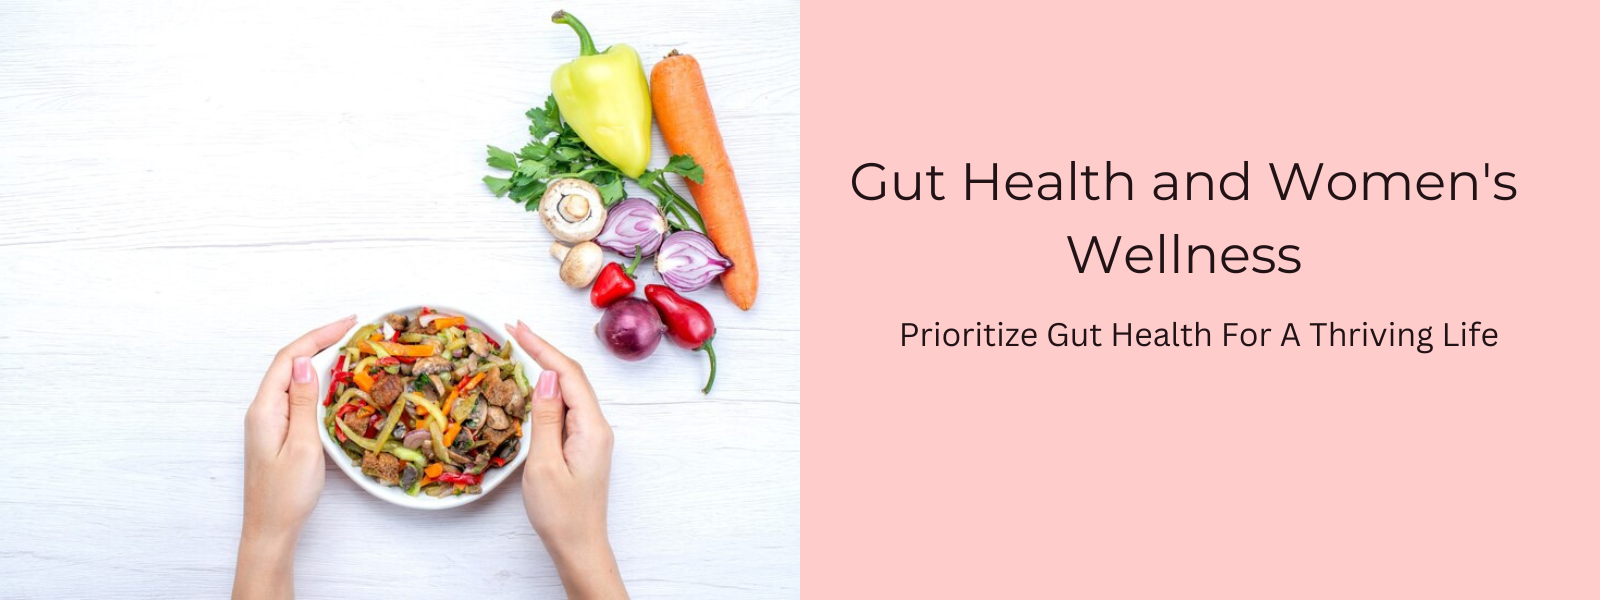 Gut Health and Women's Wellness: Prioritize Gut Health For A Thriving Life